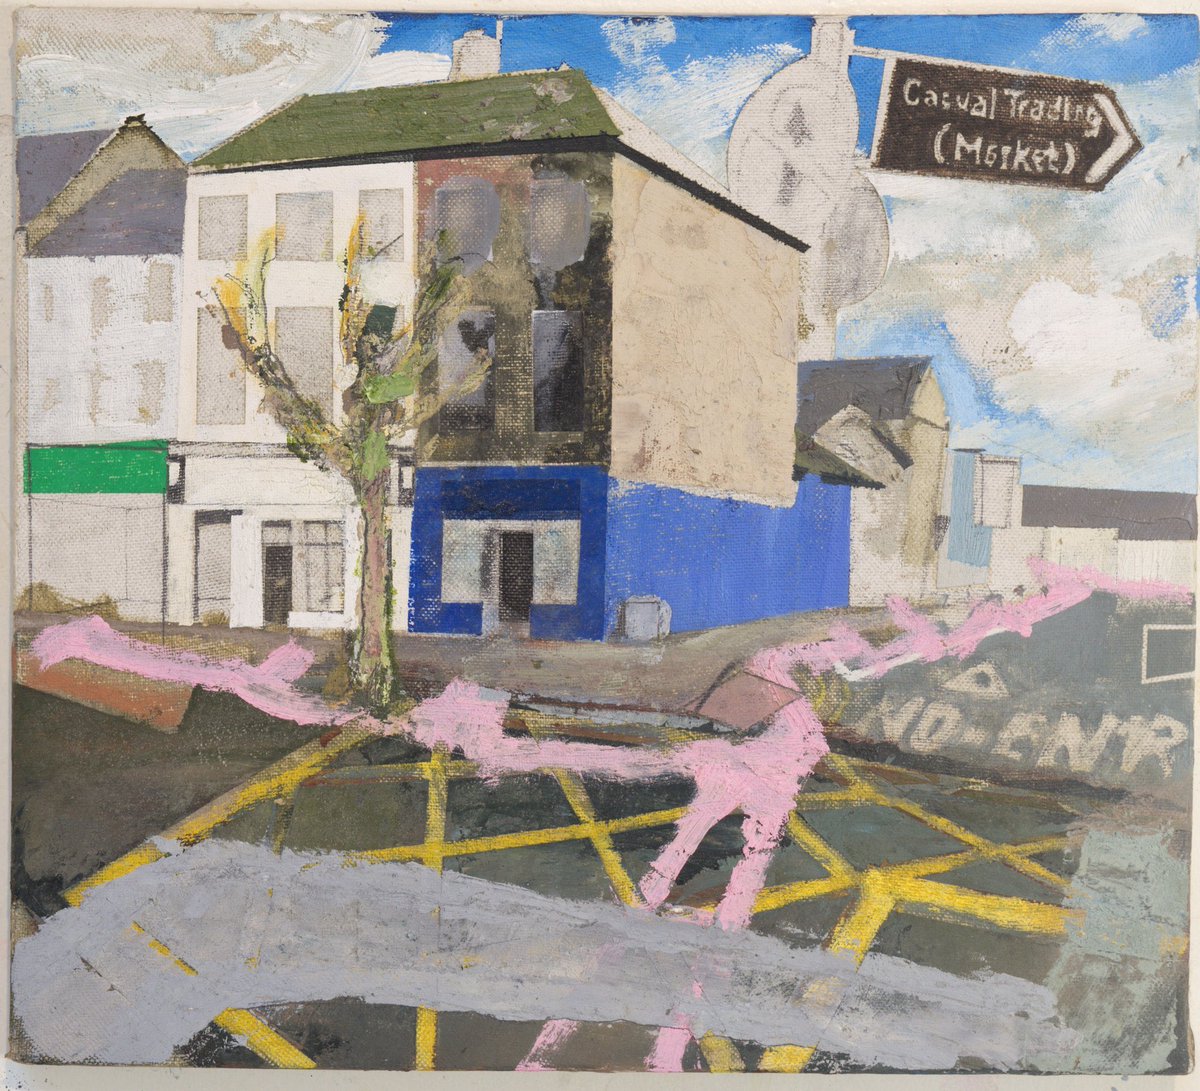 Stephen Nolan is another friend & painter. He’s based in Wexford & is probably Ireland’s most important painter of landscapes. He combines a keen eye with a documentary style & dry sense of humour. No one else captures the zeitgeist like him. Visit:  http://stephen-nolan.com 